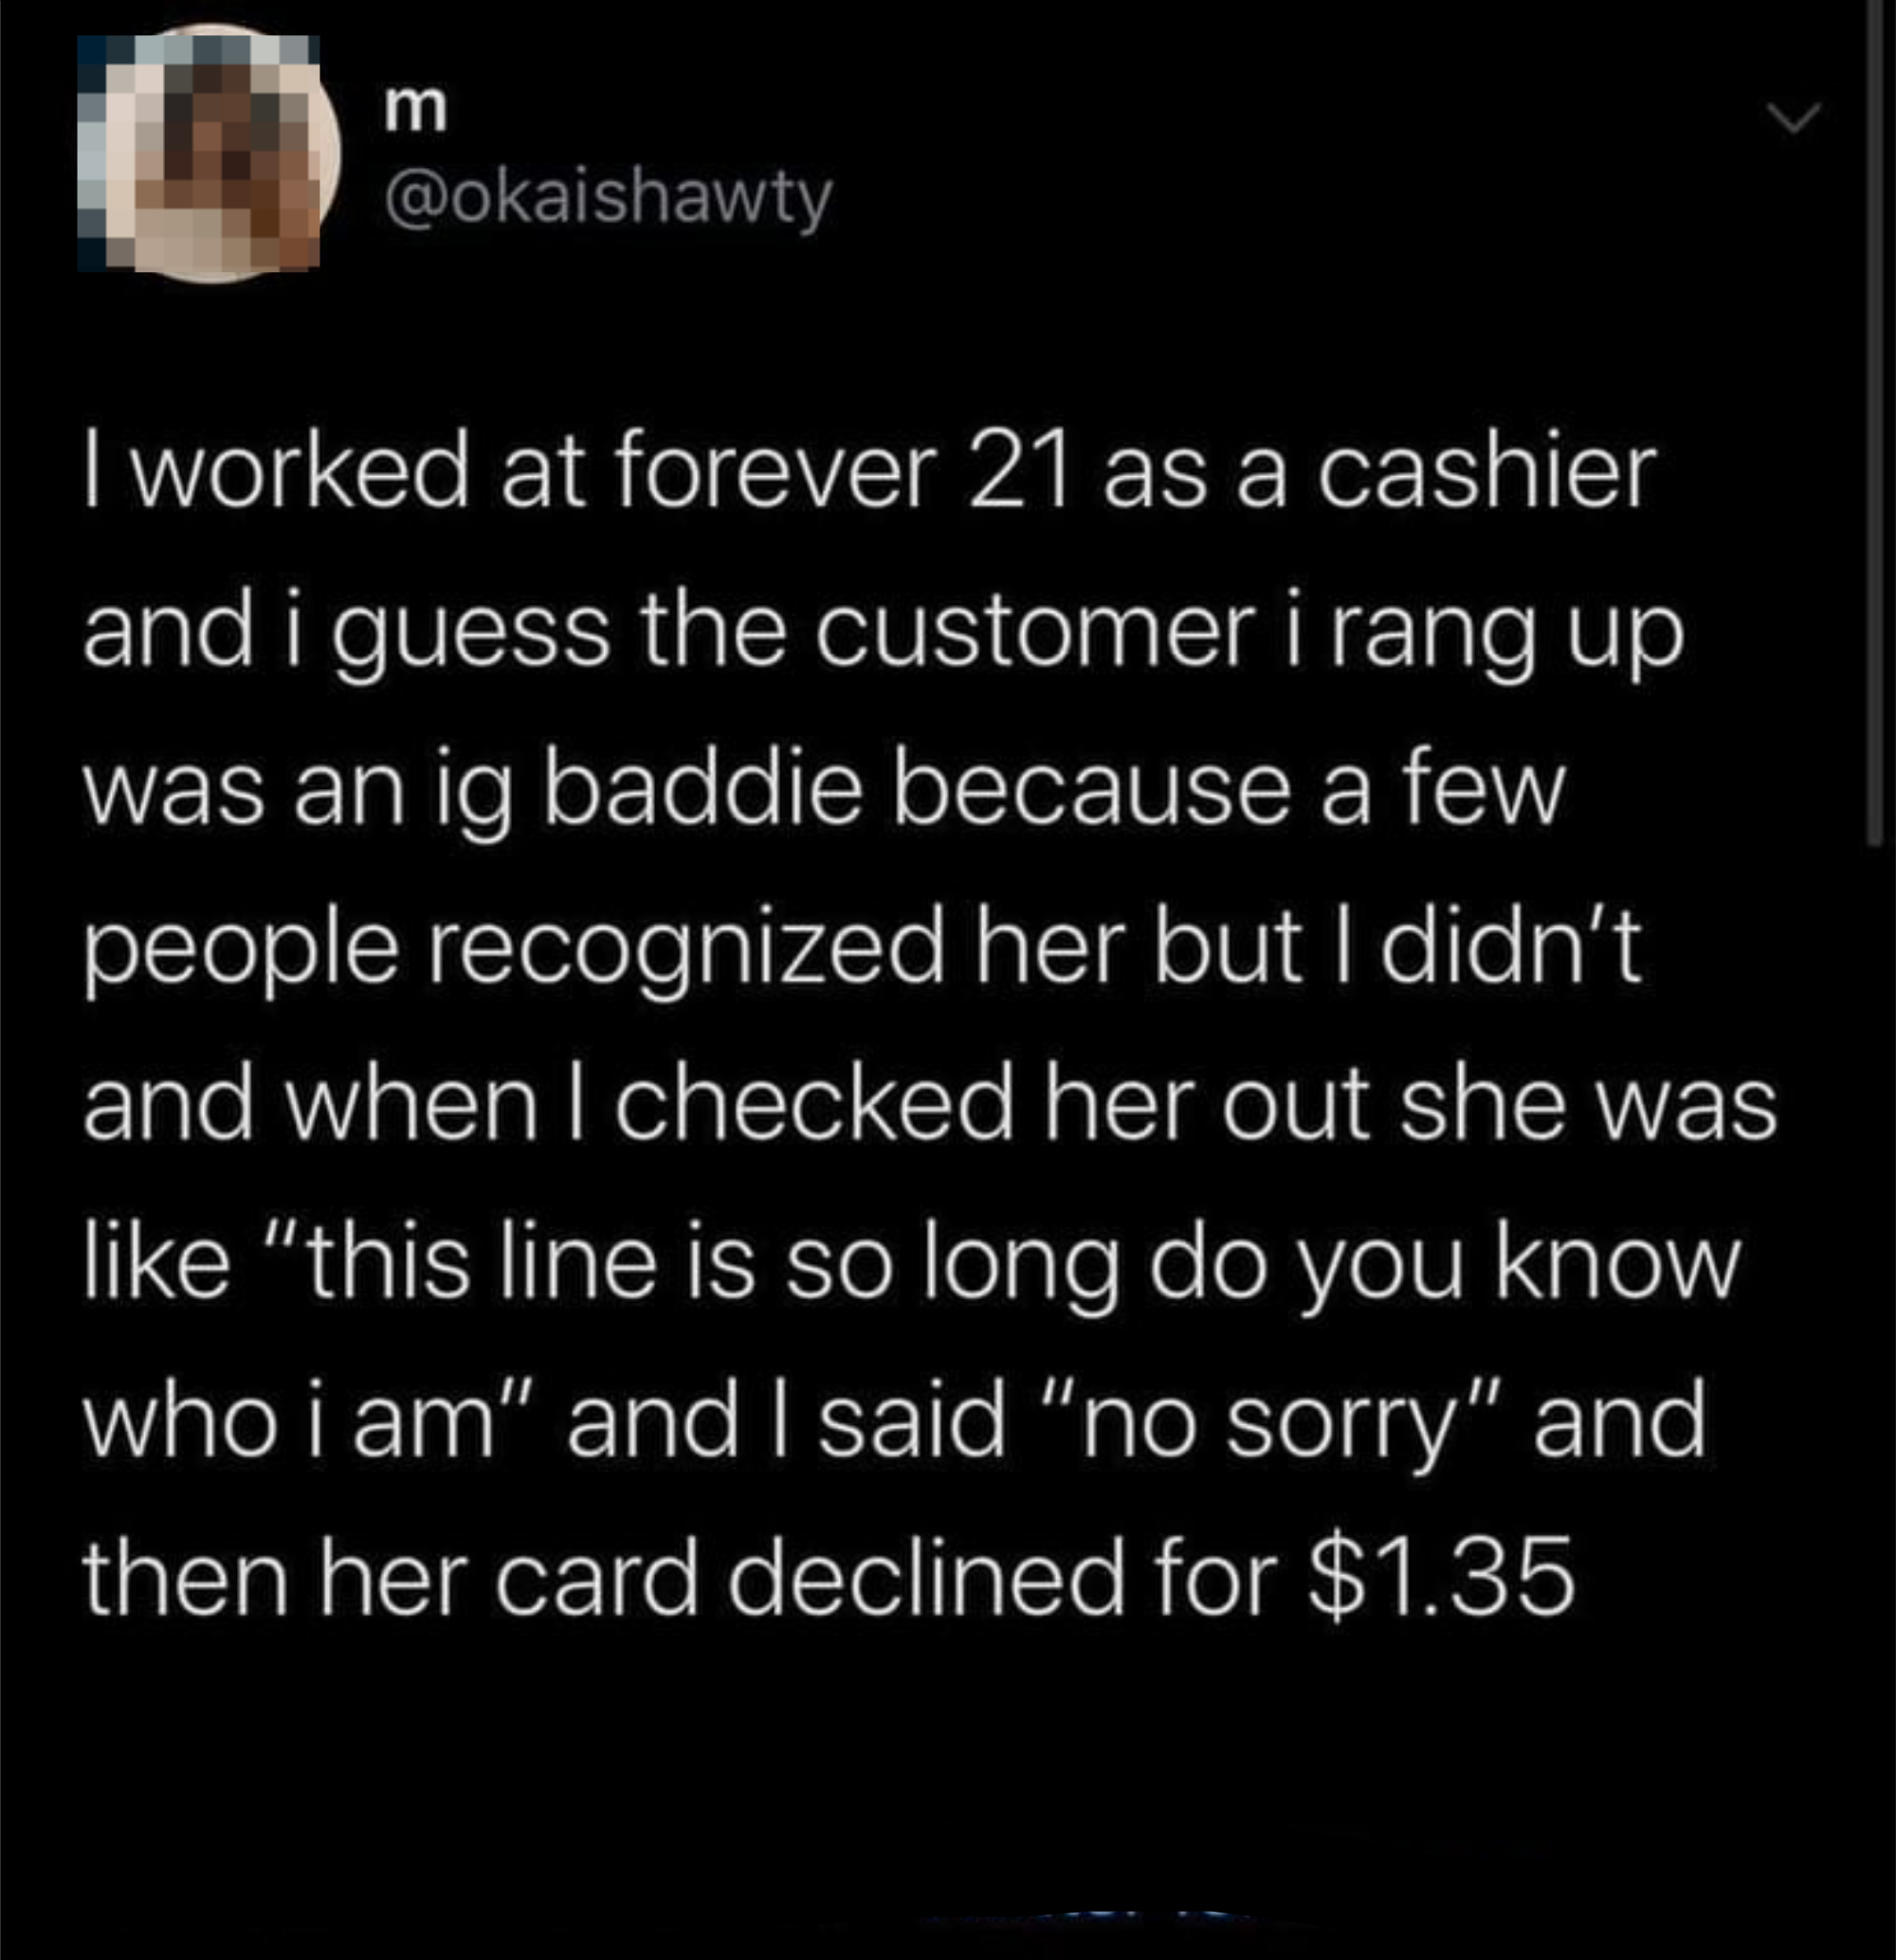 Tweet by user, recalling time as cashier when an unrecognized Instagram celebrity expected special treatment, but was charged normally